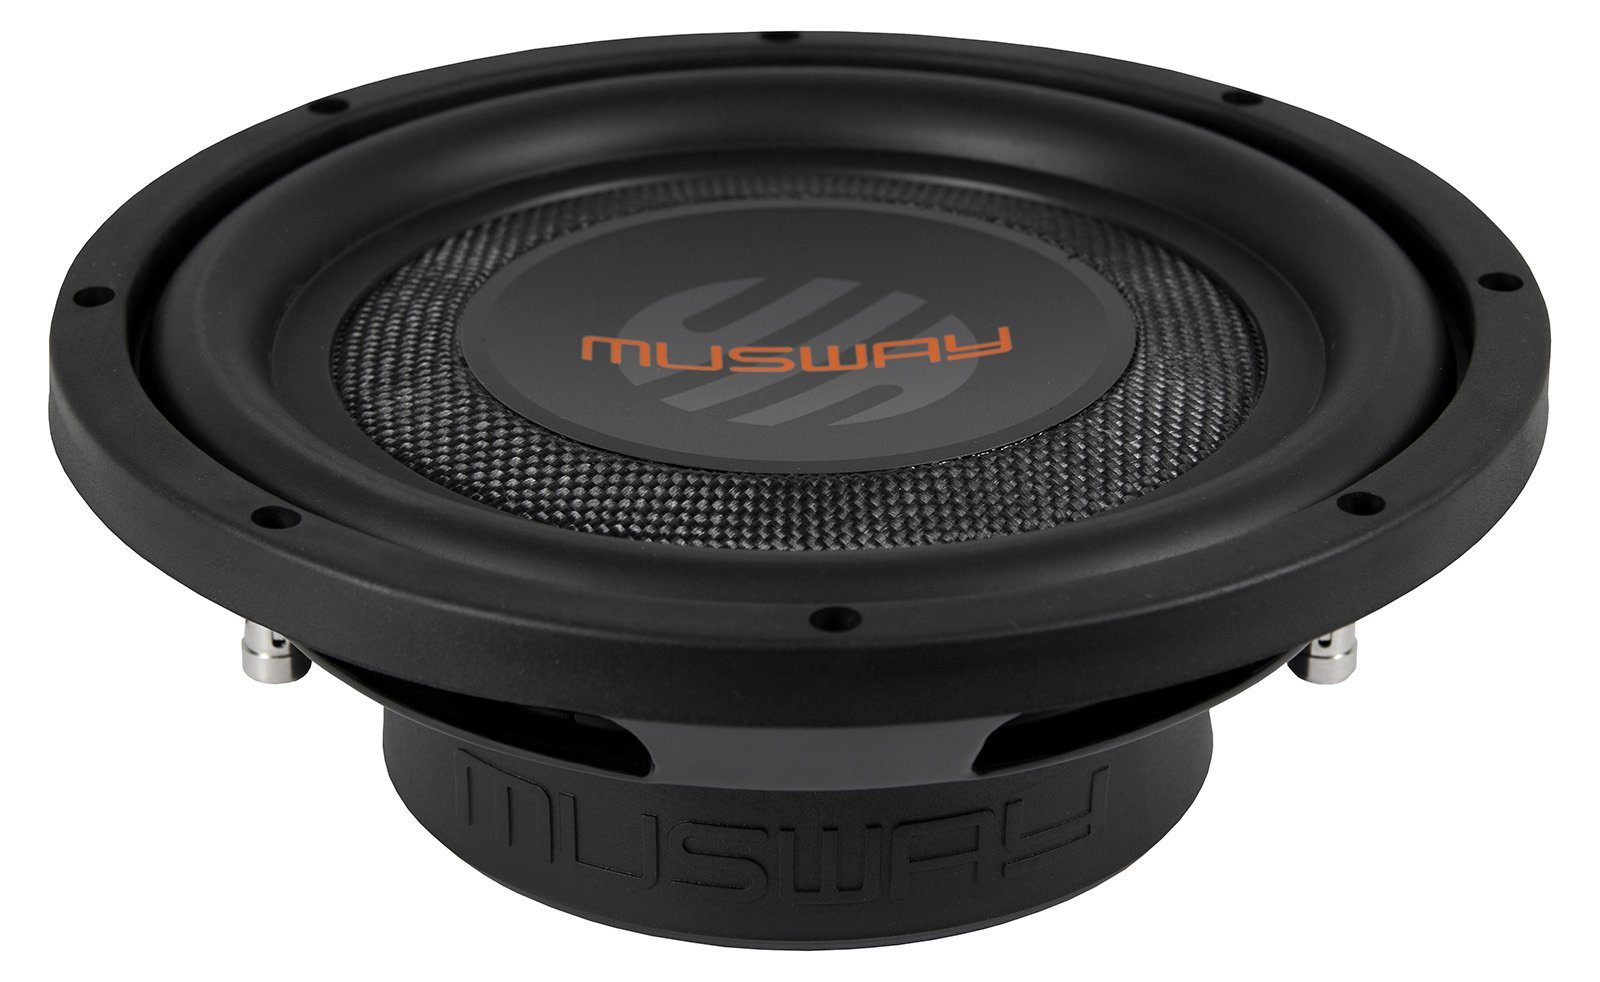 Musway MWS1022 10? FLAT Subwoofer 10? (25 cm) FLACH Subwoofer Auto-Subwoofer (300 W, Musway MWS1022, 10“ FLAT Subwoofer 10“ (25 cm) FLACH Subwoofer)